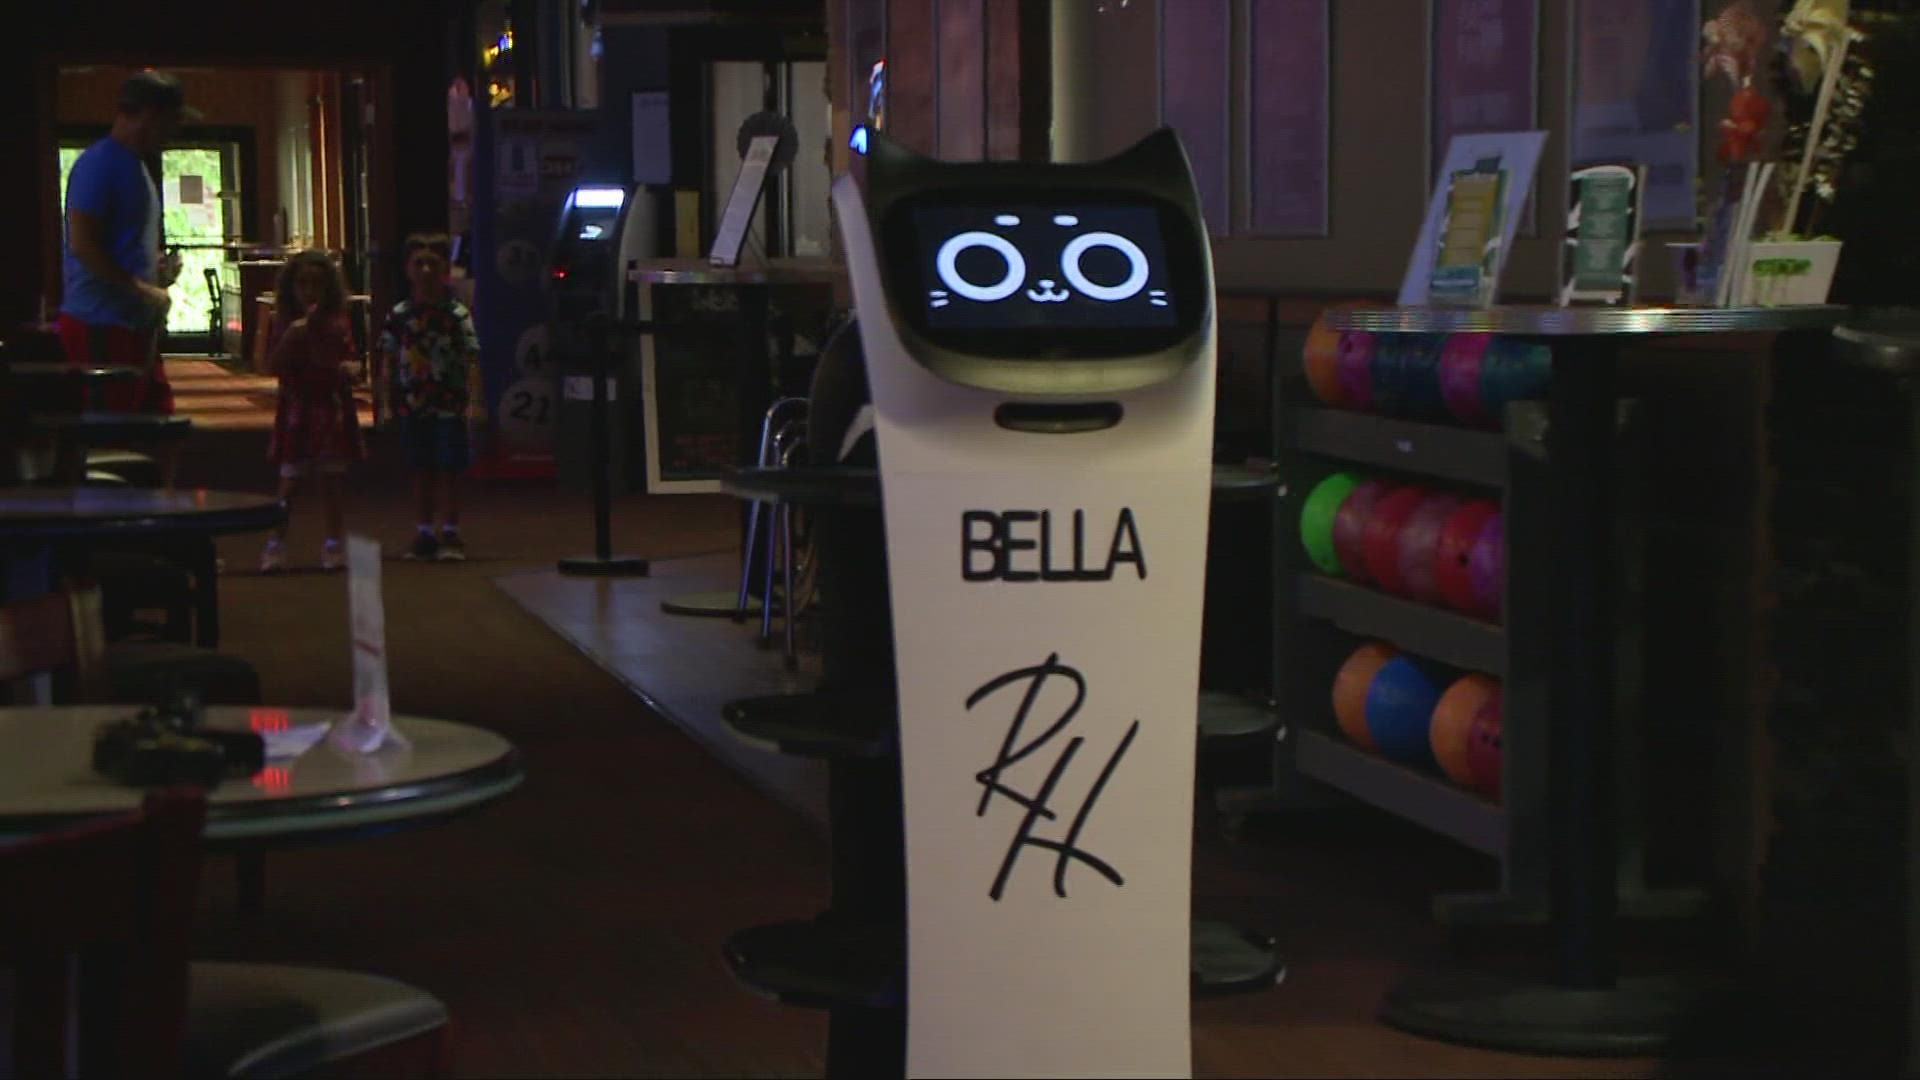 At RollHouse Solon, Bella the robot assists her human coworkers, delivering food to hungry customers